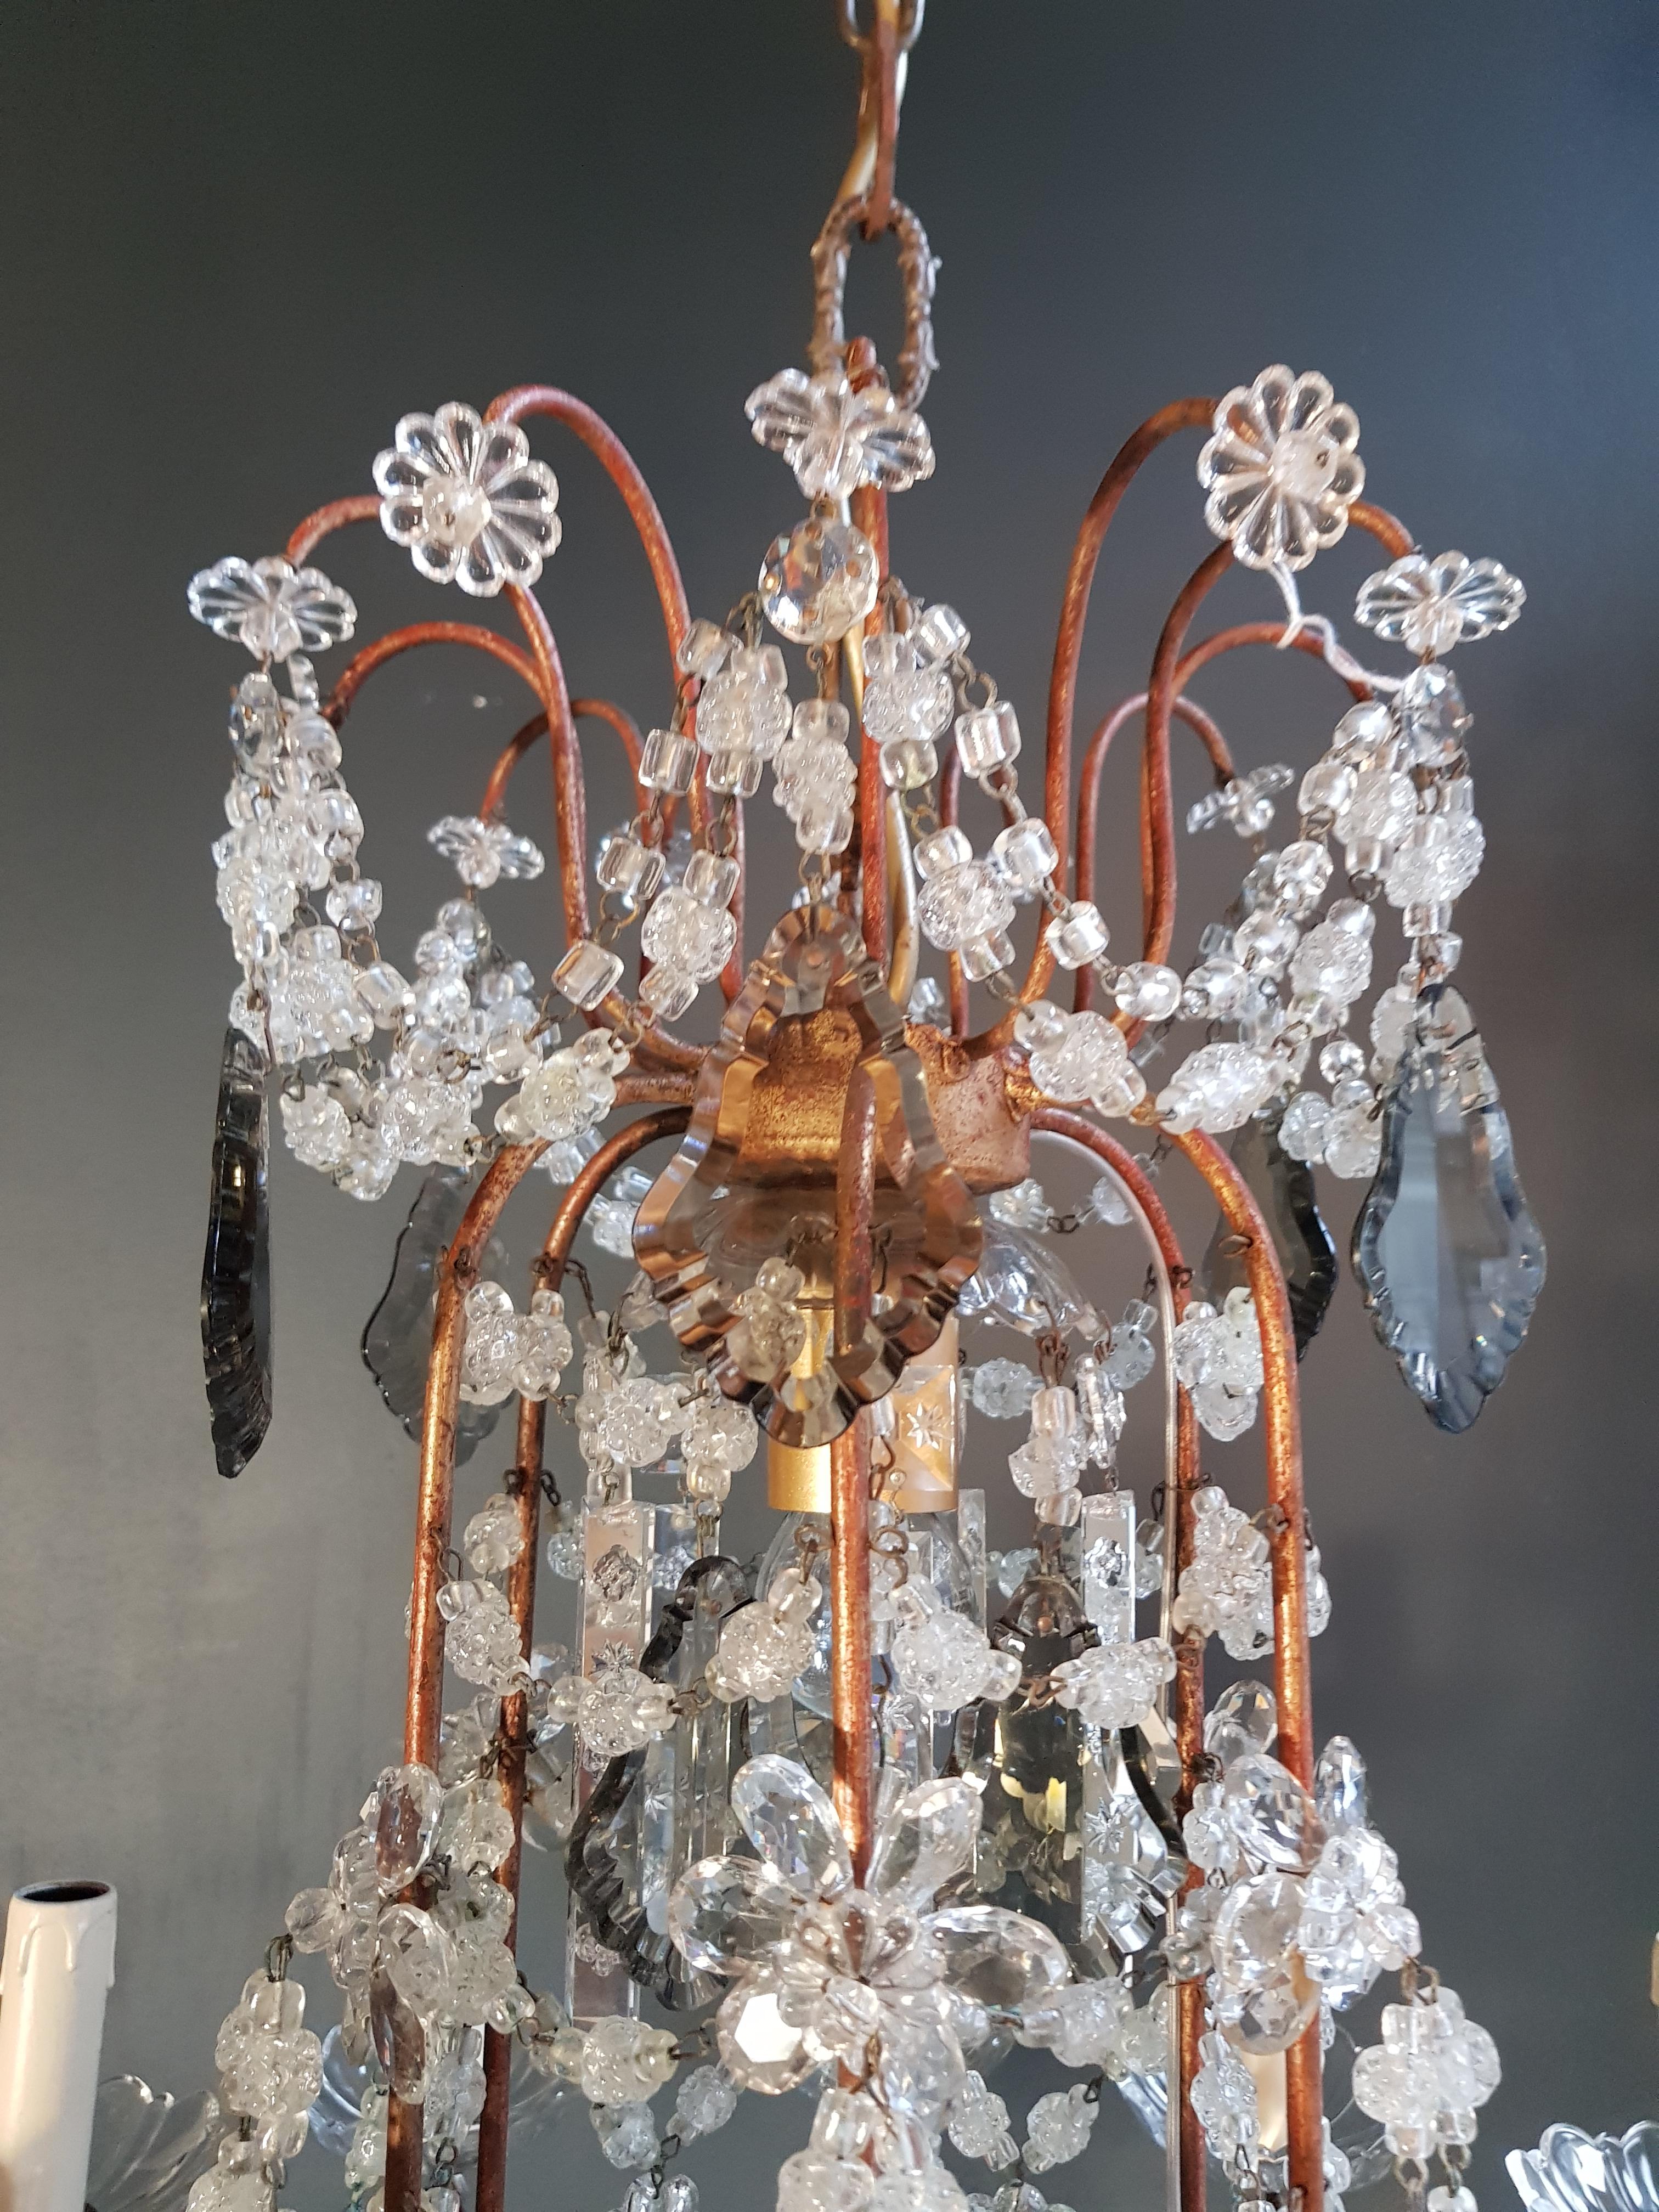 Antique Florentiner crystal chandelier ceiling lamp Lustre Art Nouveau Rarity

Measures: Total height 110 cm, height without chain 80 cm, diameter 65 cm. Weight (approximately): 13kg.

Number of lights: 13-light bulb sockets: 12 x E14 and 1 x E27